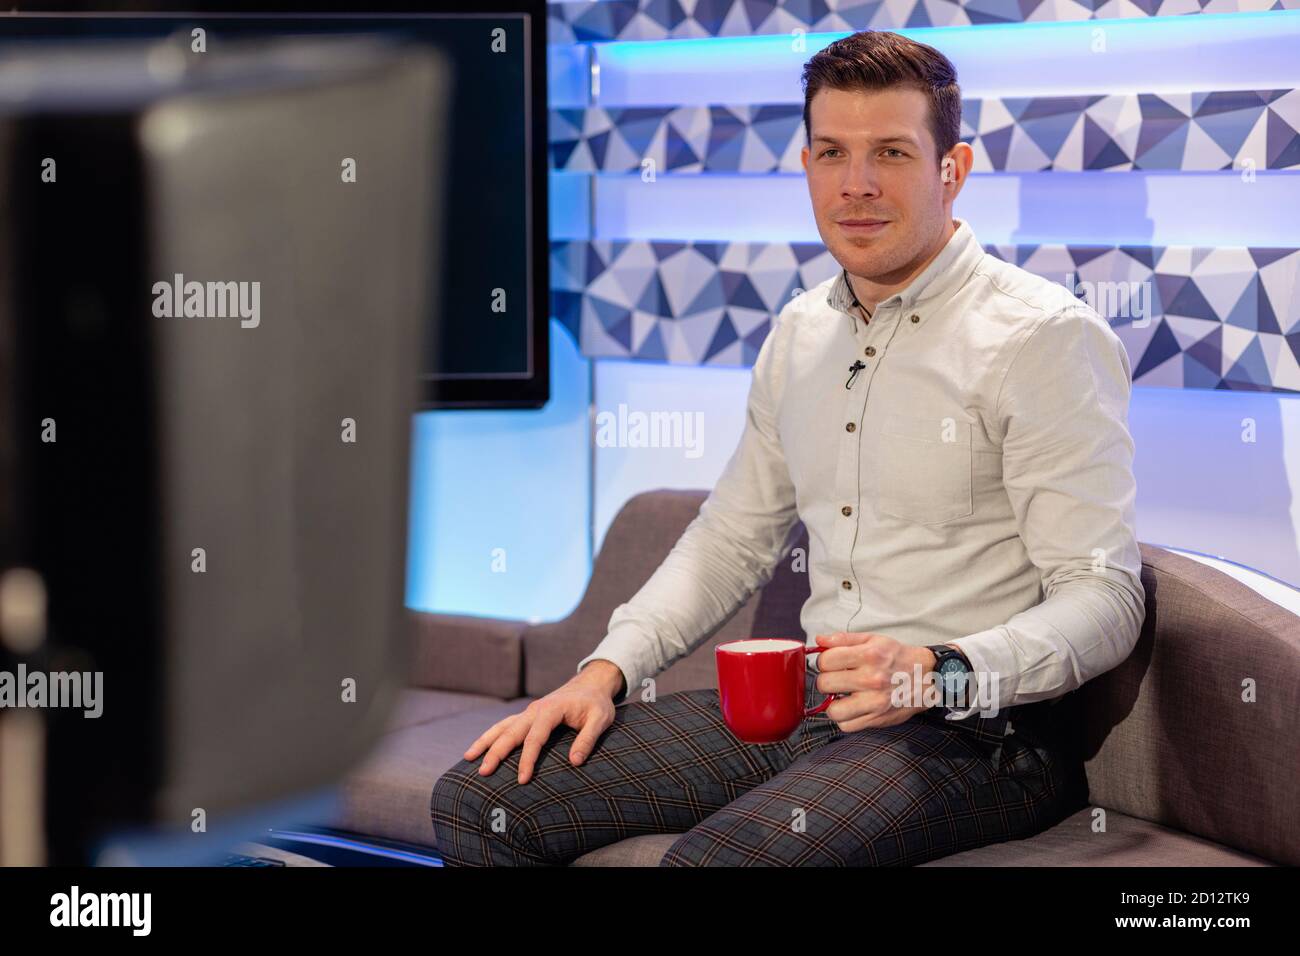 A TV host sitting on a sofa in a film studio, holding a mug of tea. He is taking a break from filming a TV show. Stock Photo